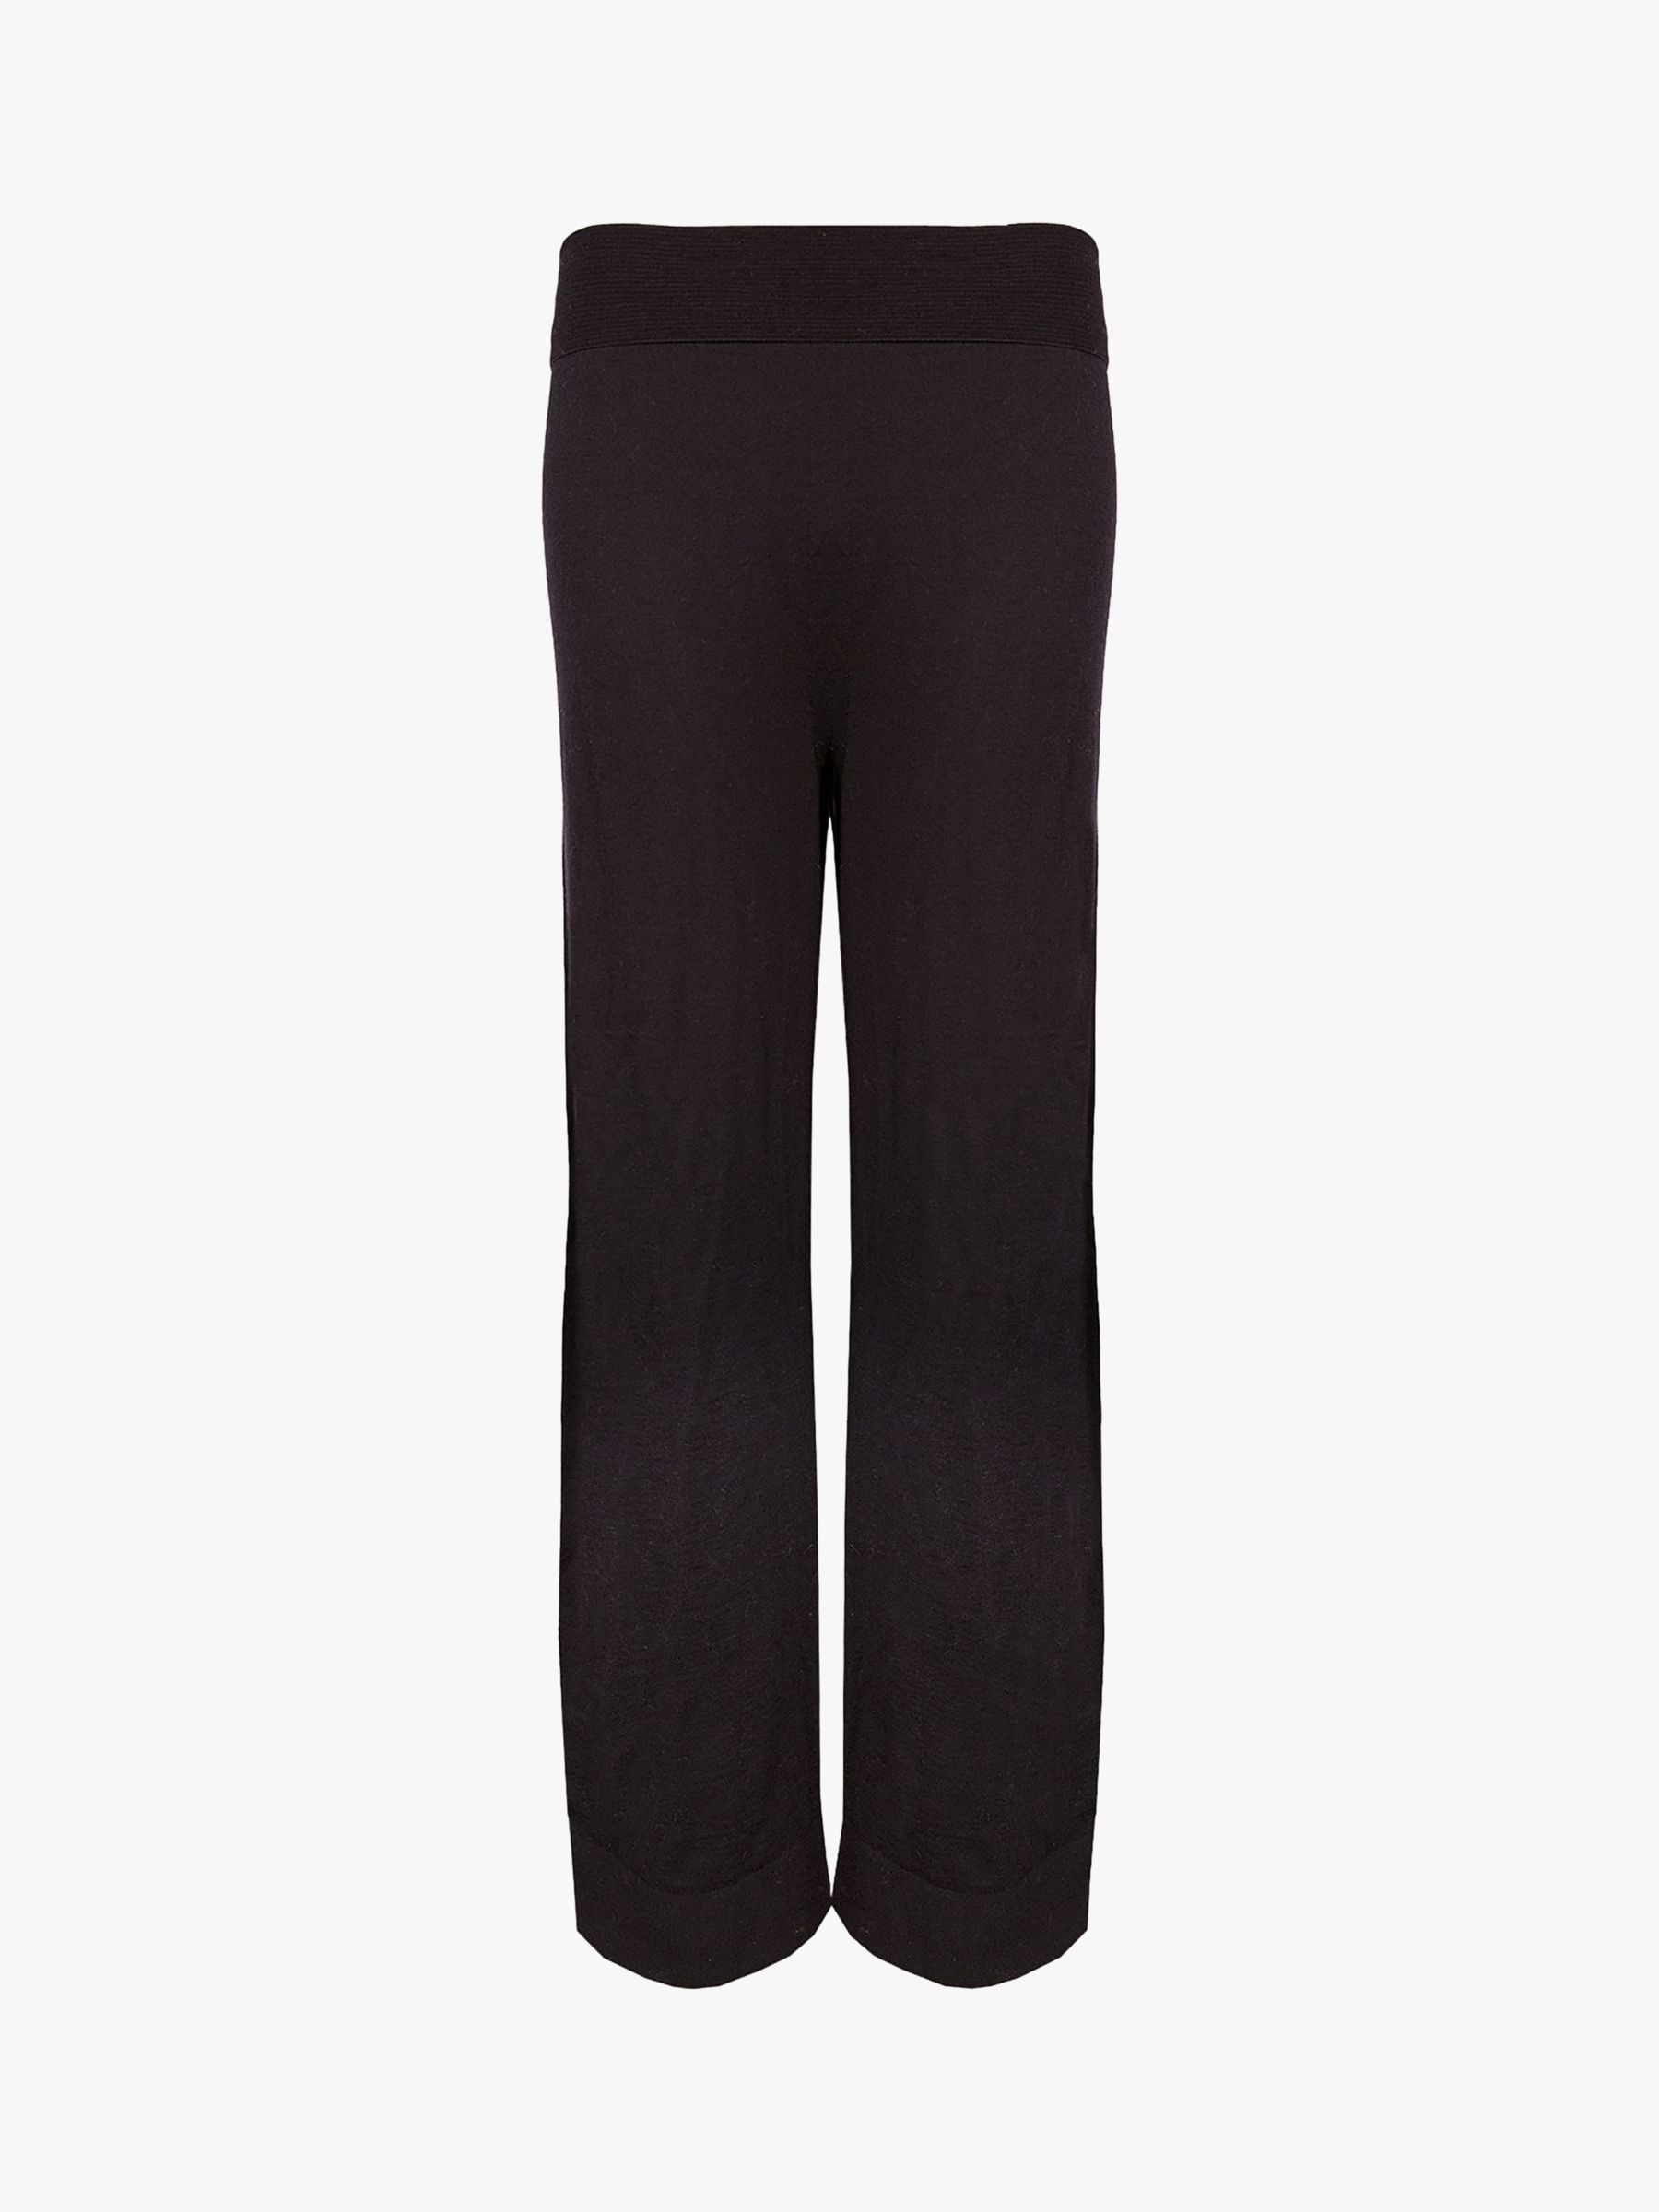 Celtic & Co. Wool Lounge Trousers, Navy at John Lewis & Partners